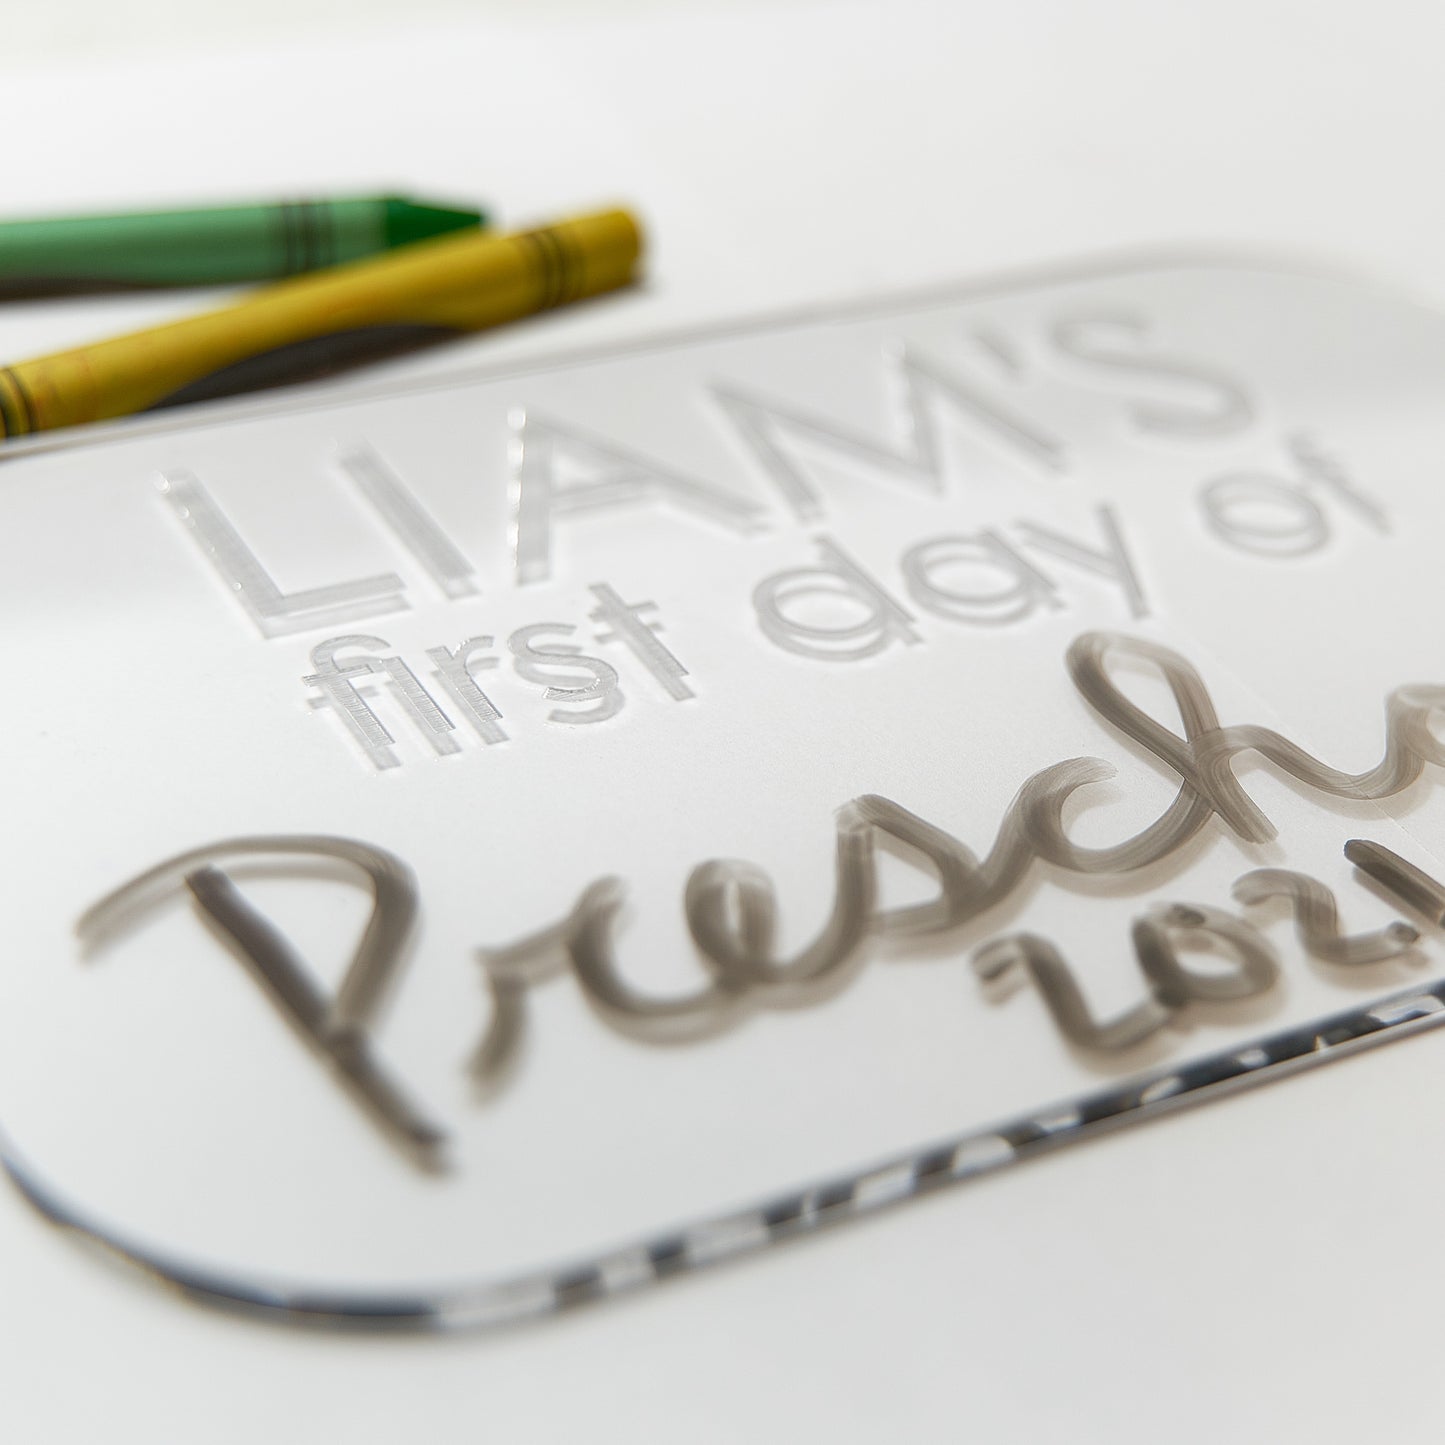 Dry-Erase Personalized First Day of School Sign